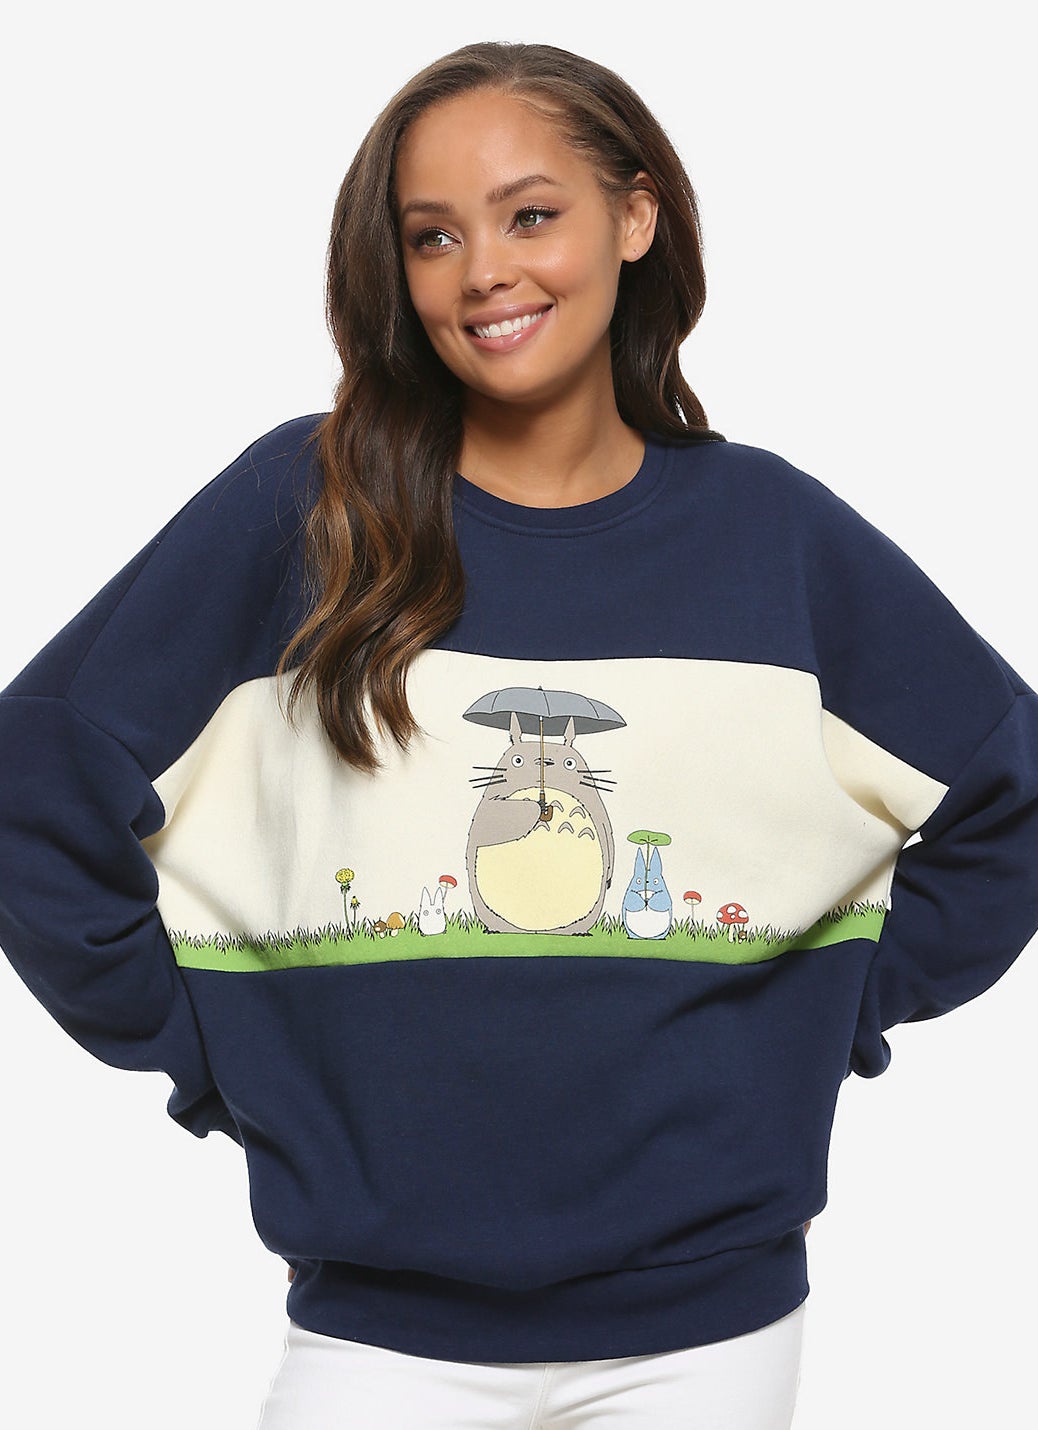 a model in a navy sweatshirt with a scene from my neighbor totoro on it